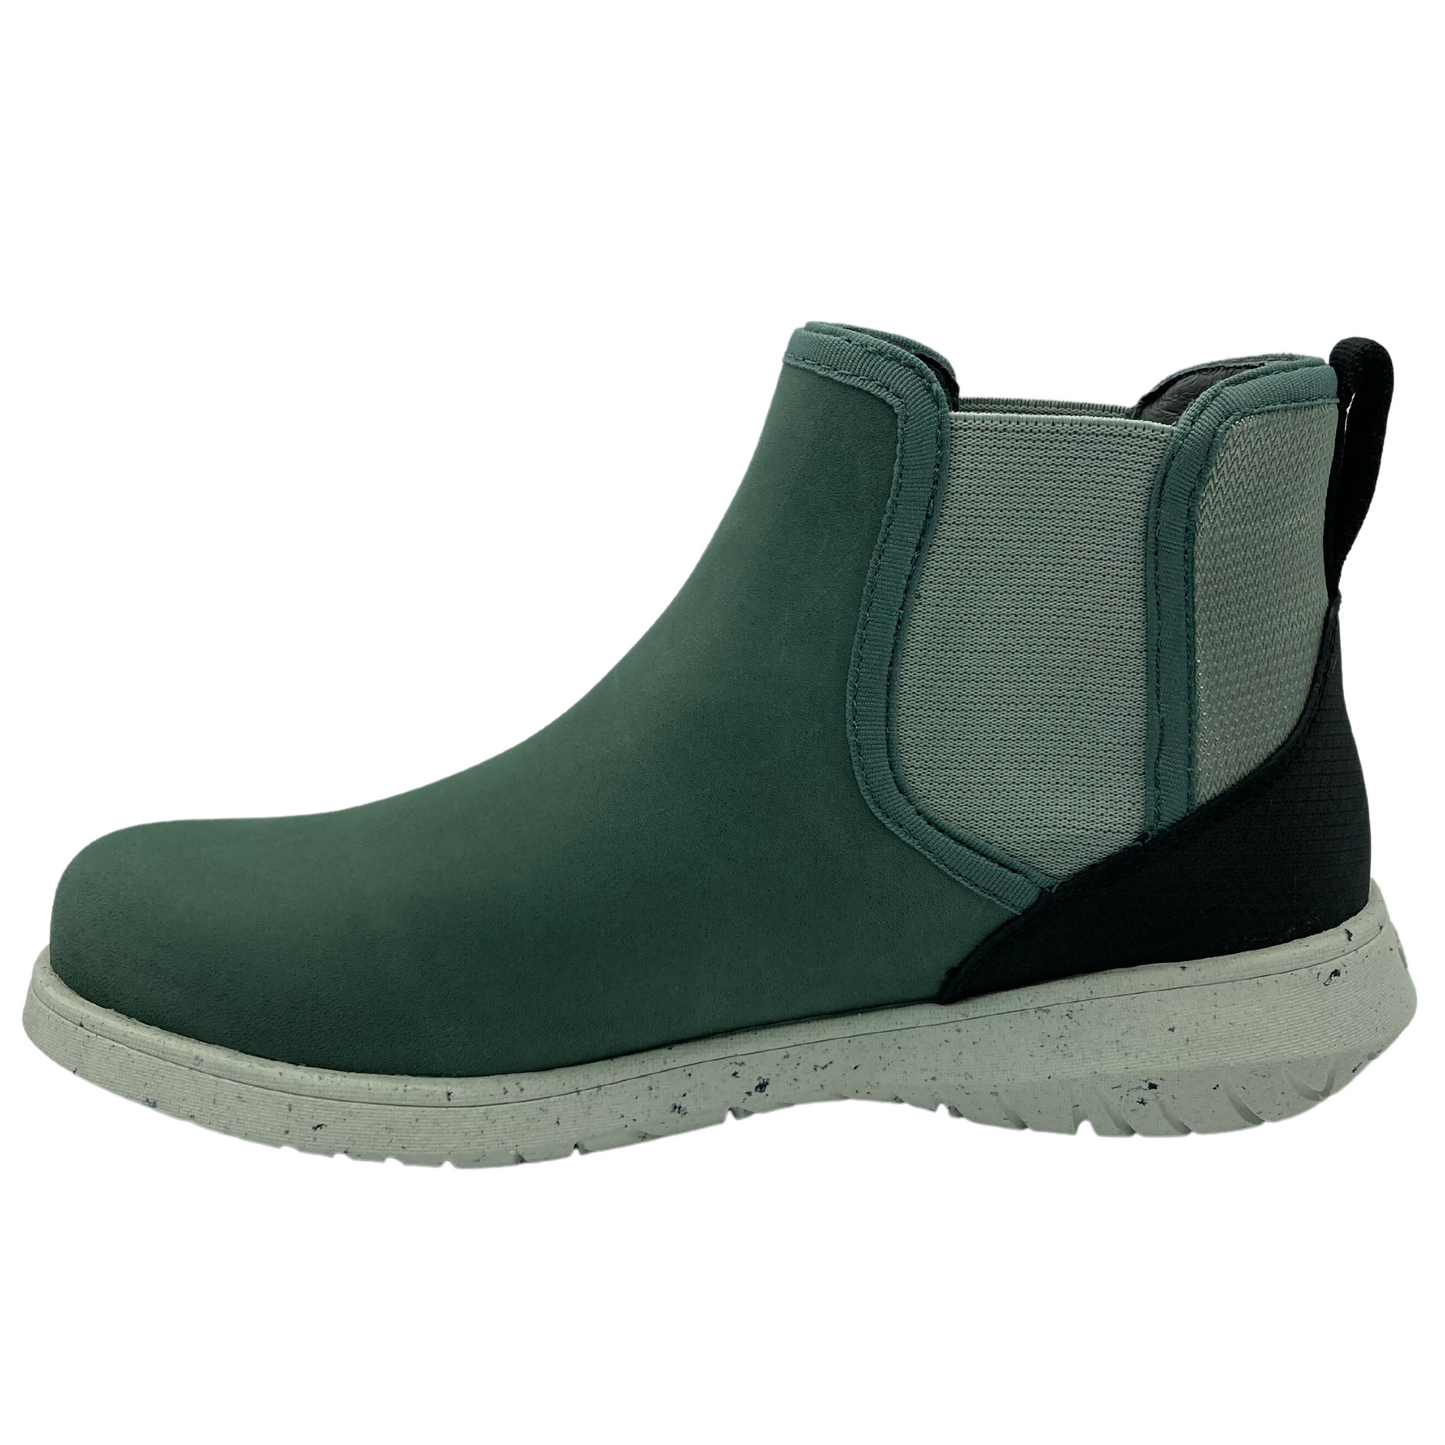 Left facing view of short green boot with elastic side gores and white outsole